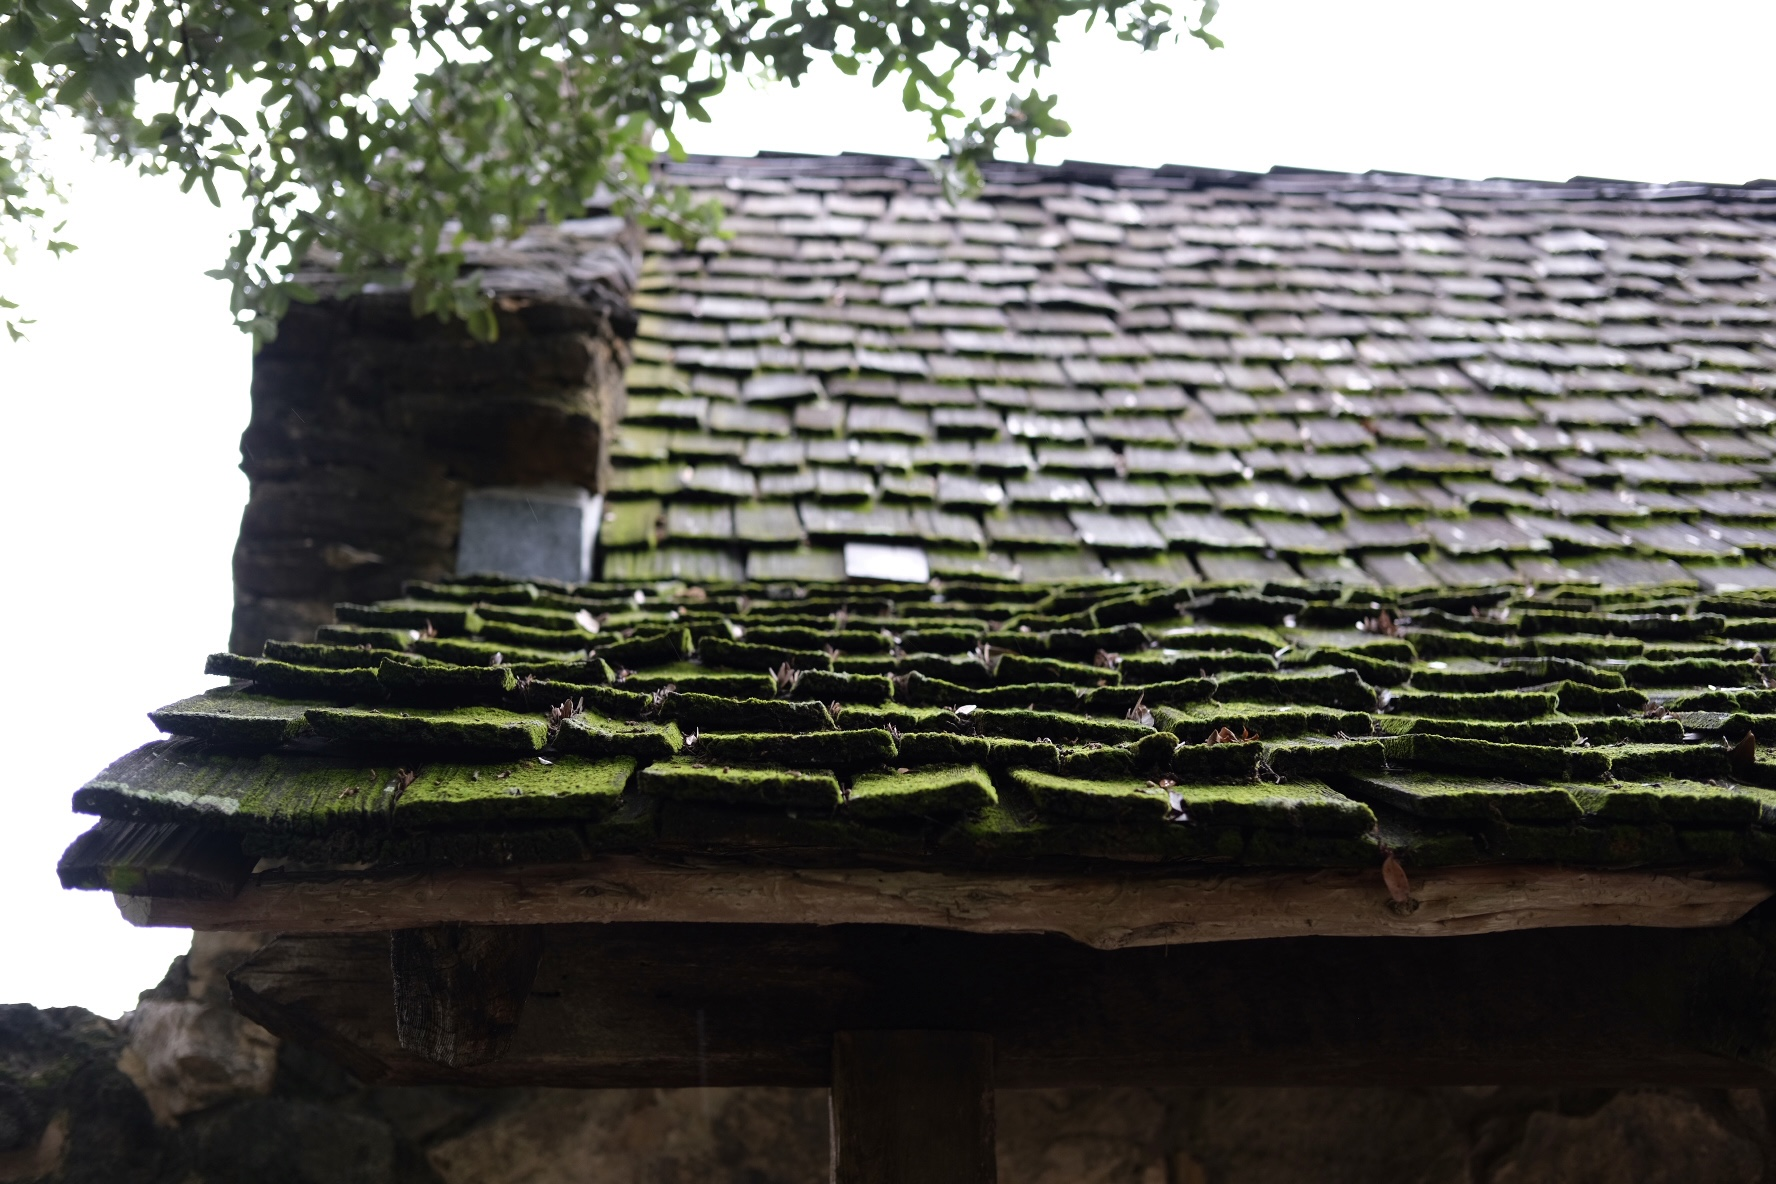 A view of the house roof next to chapel in Mission San Juan. Moss covers the lower roof tiles underneath a neighboring tree.